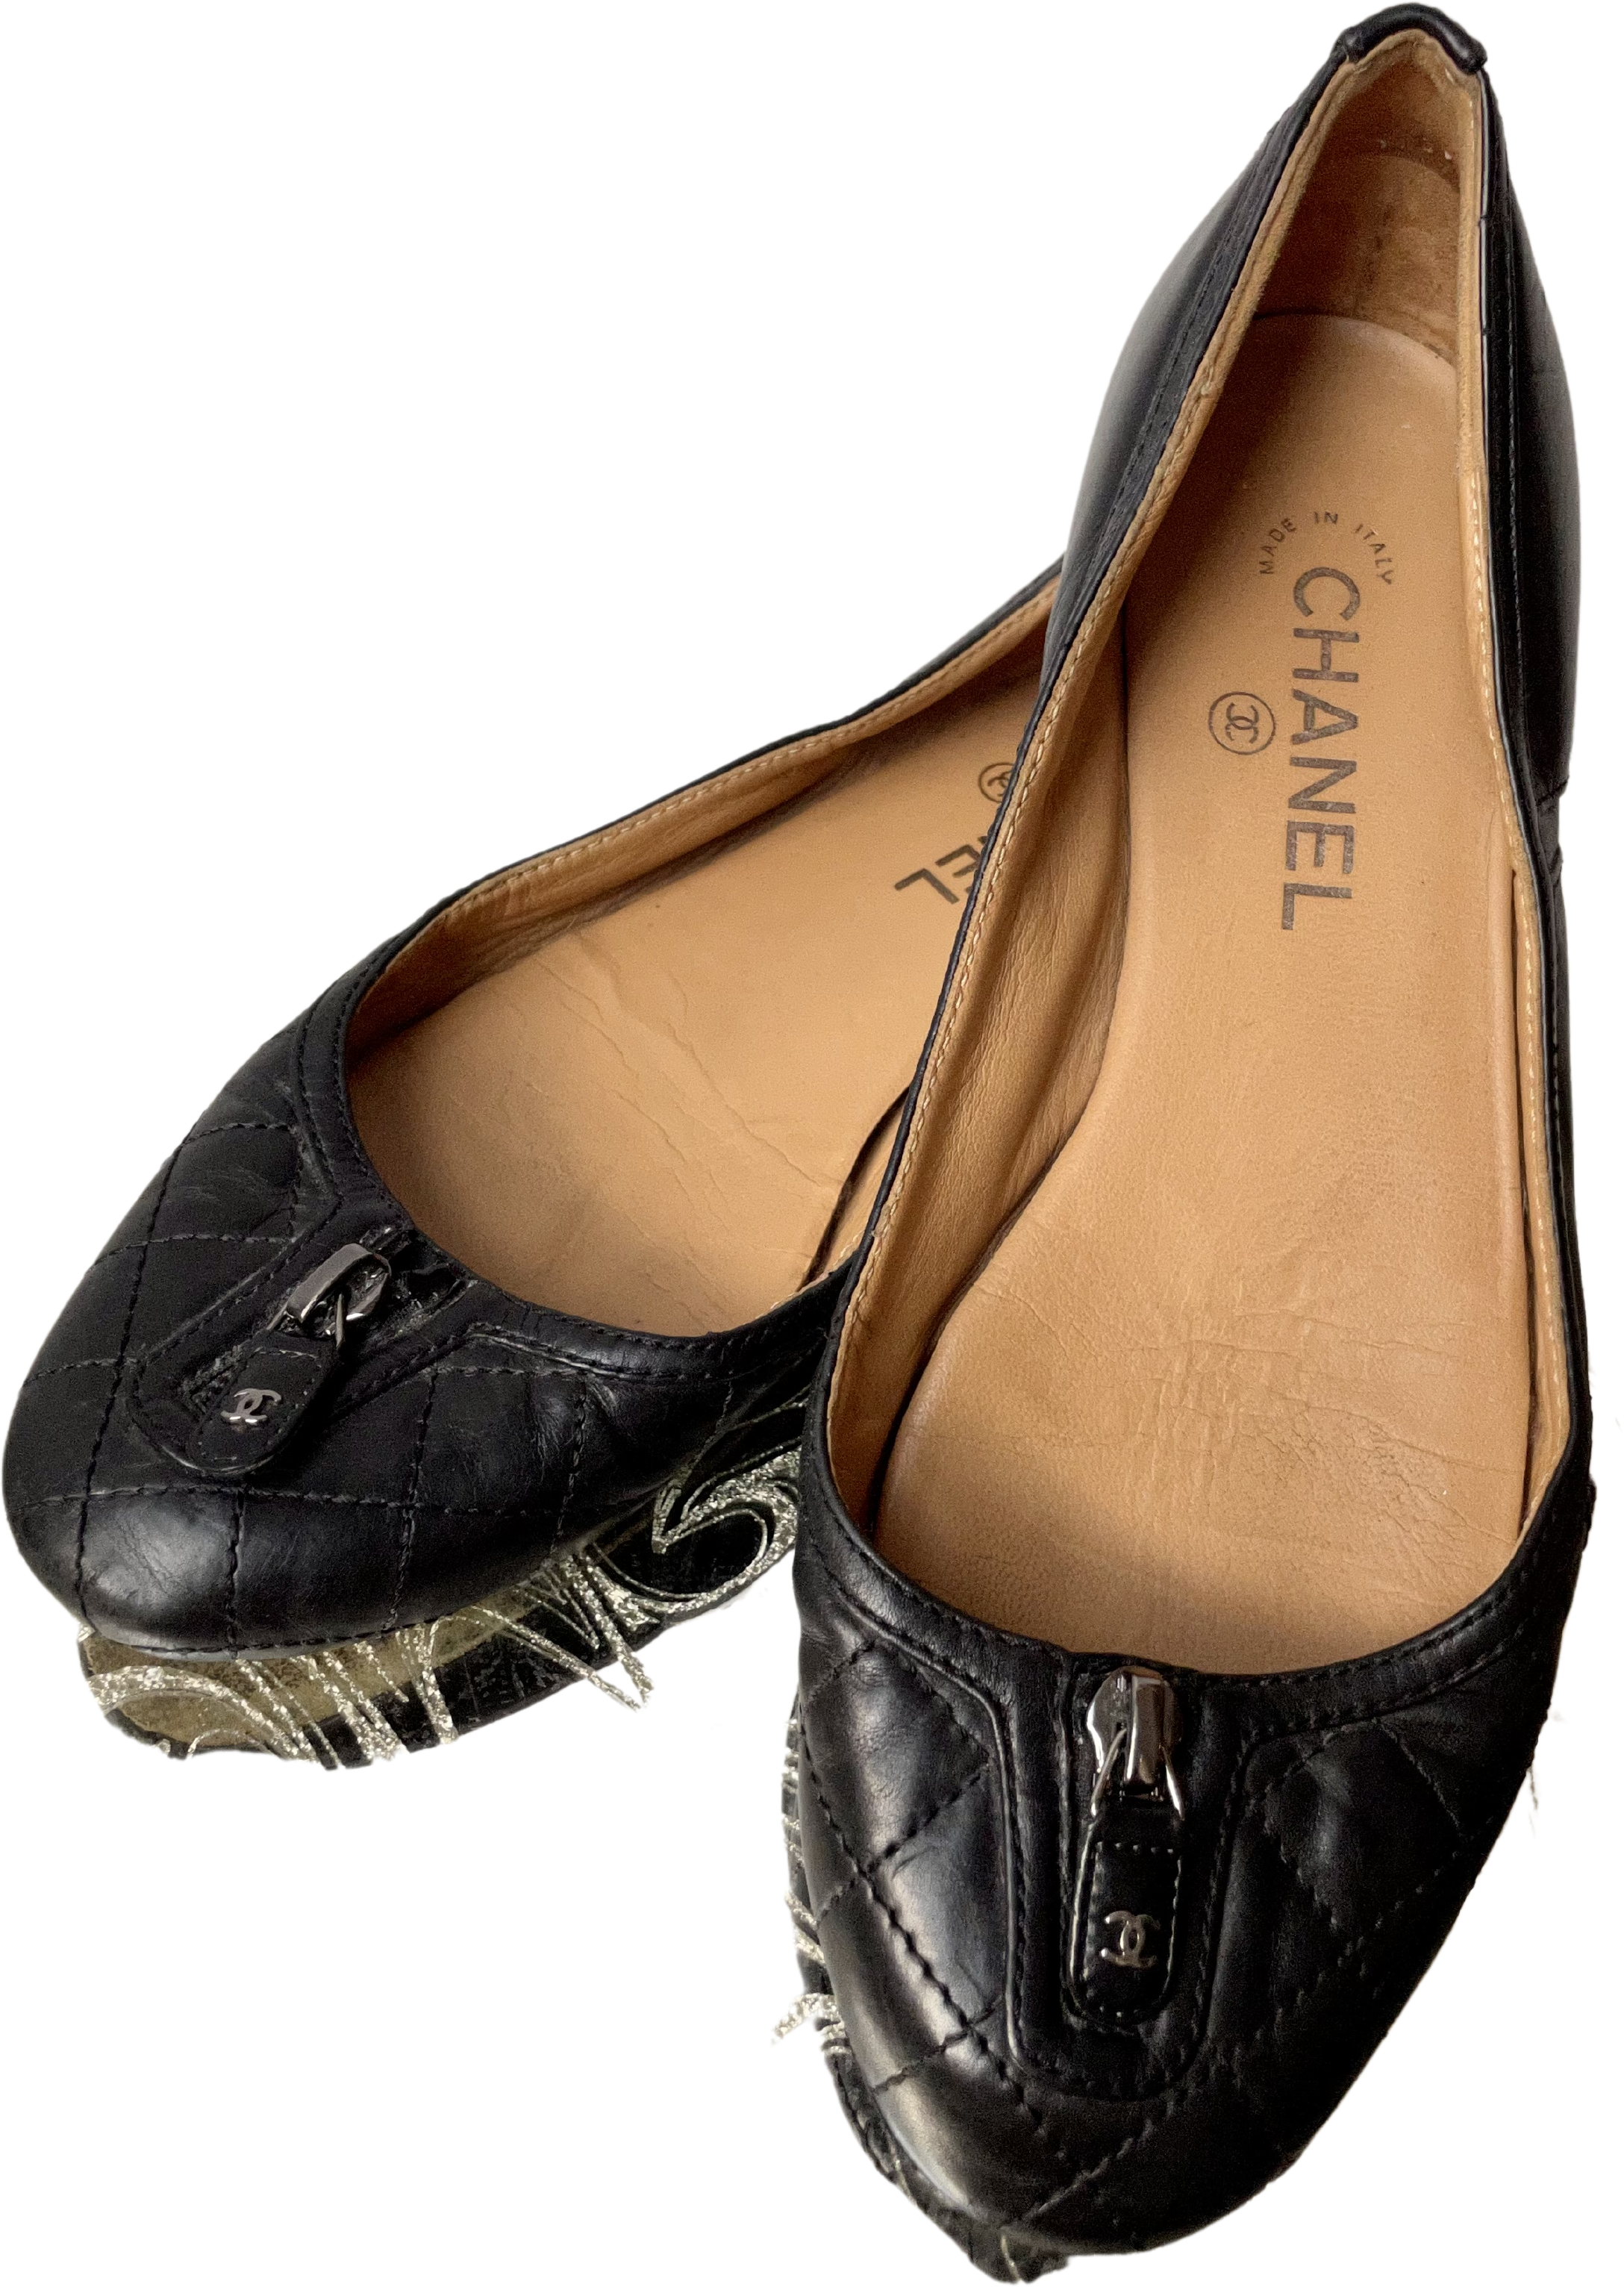 Vintage 90s/00s Black Leather Quilted Ballet Flats By Chanel